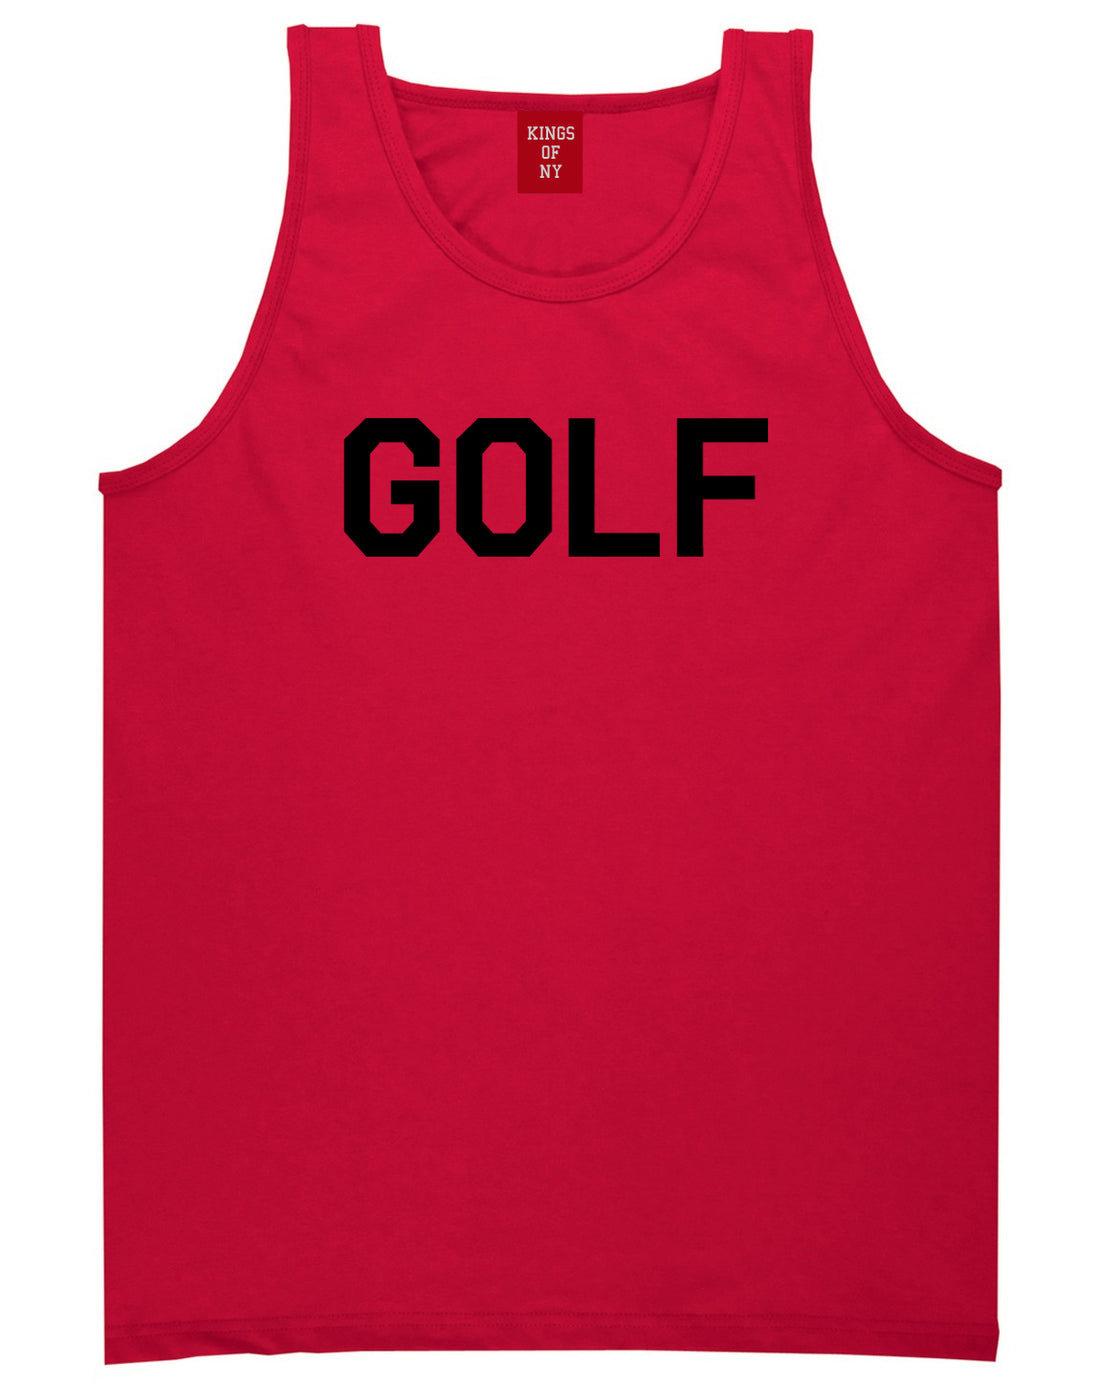 Golf Sport Mens Red Tank Top Shirt by KINGS OF NY